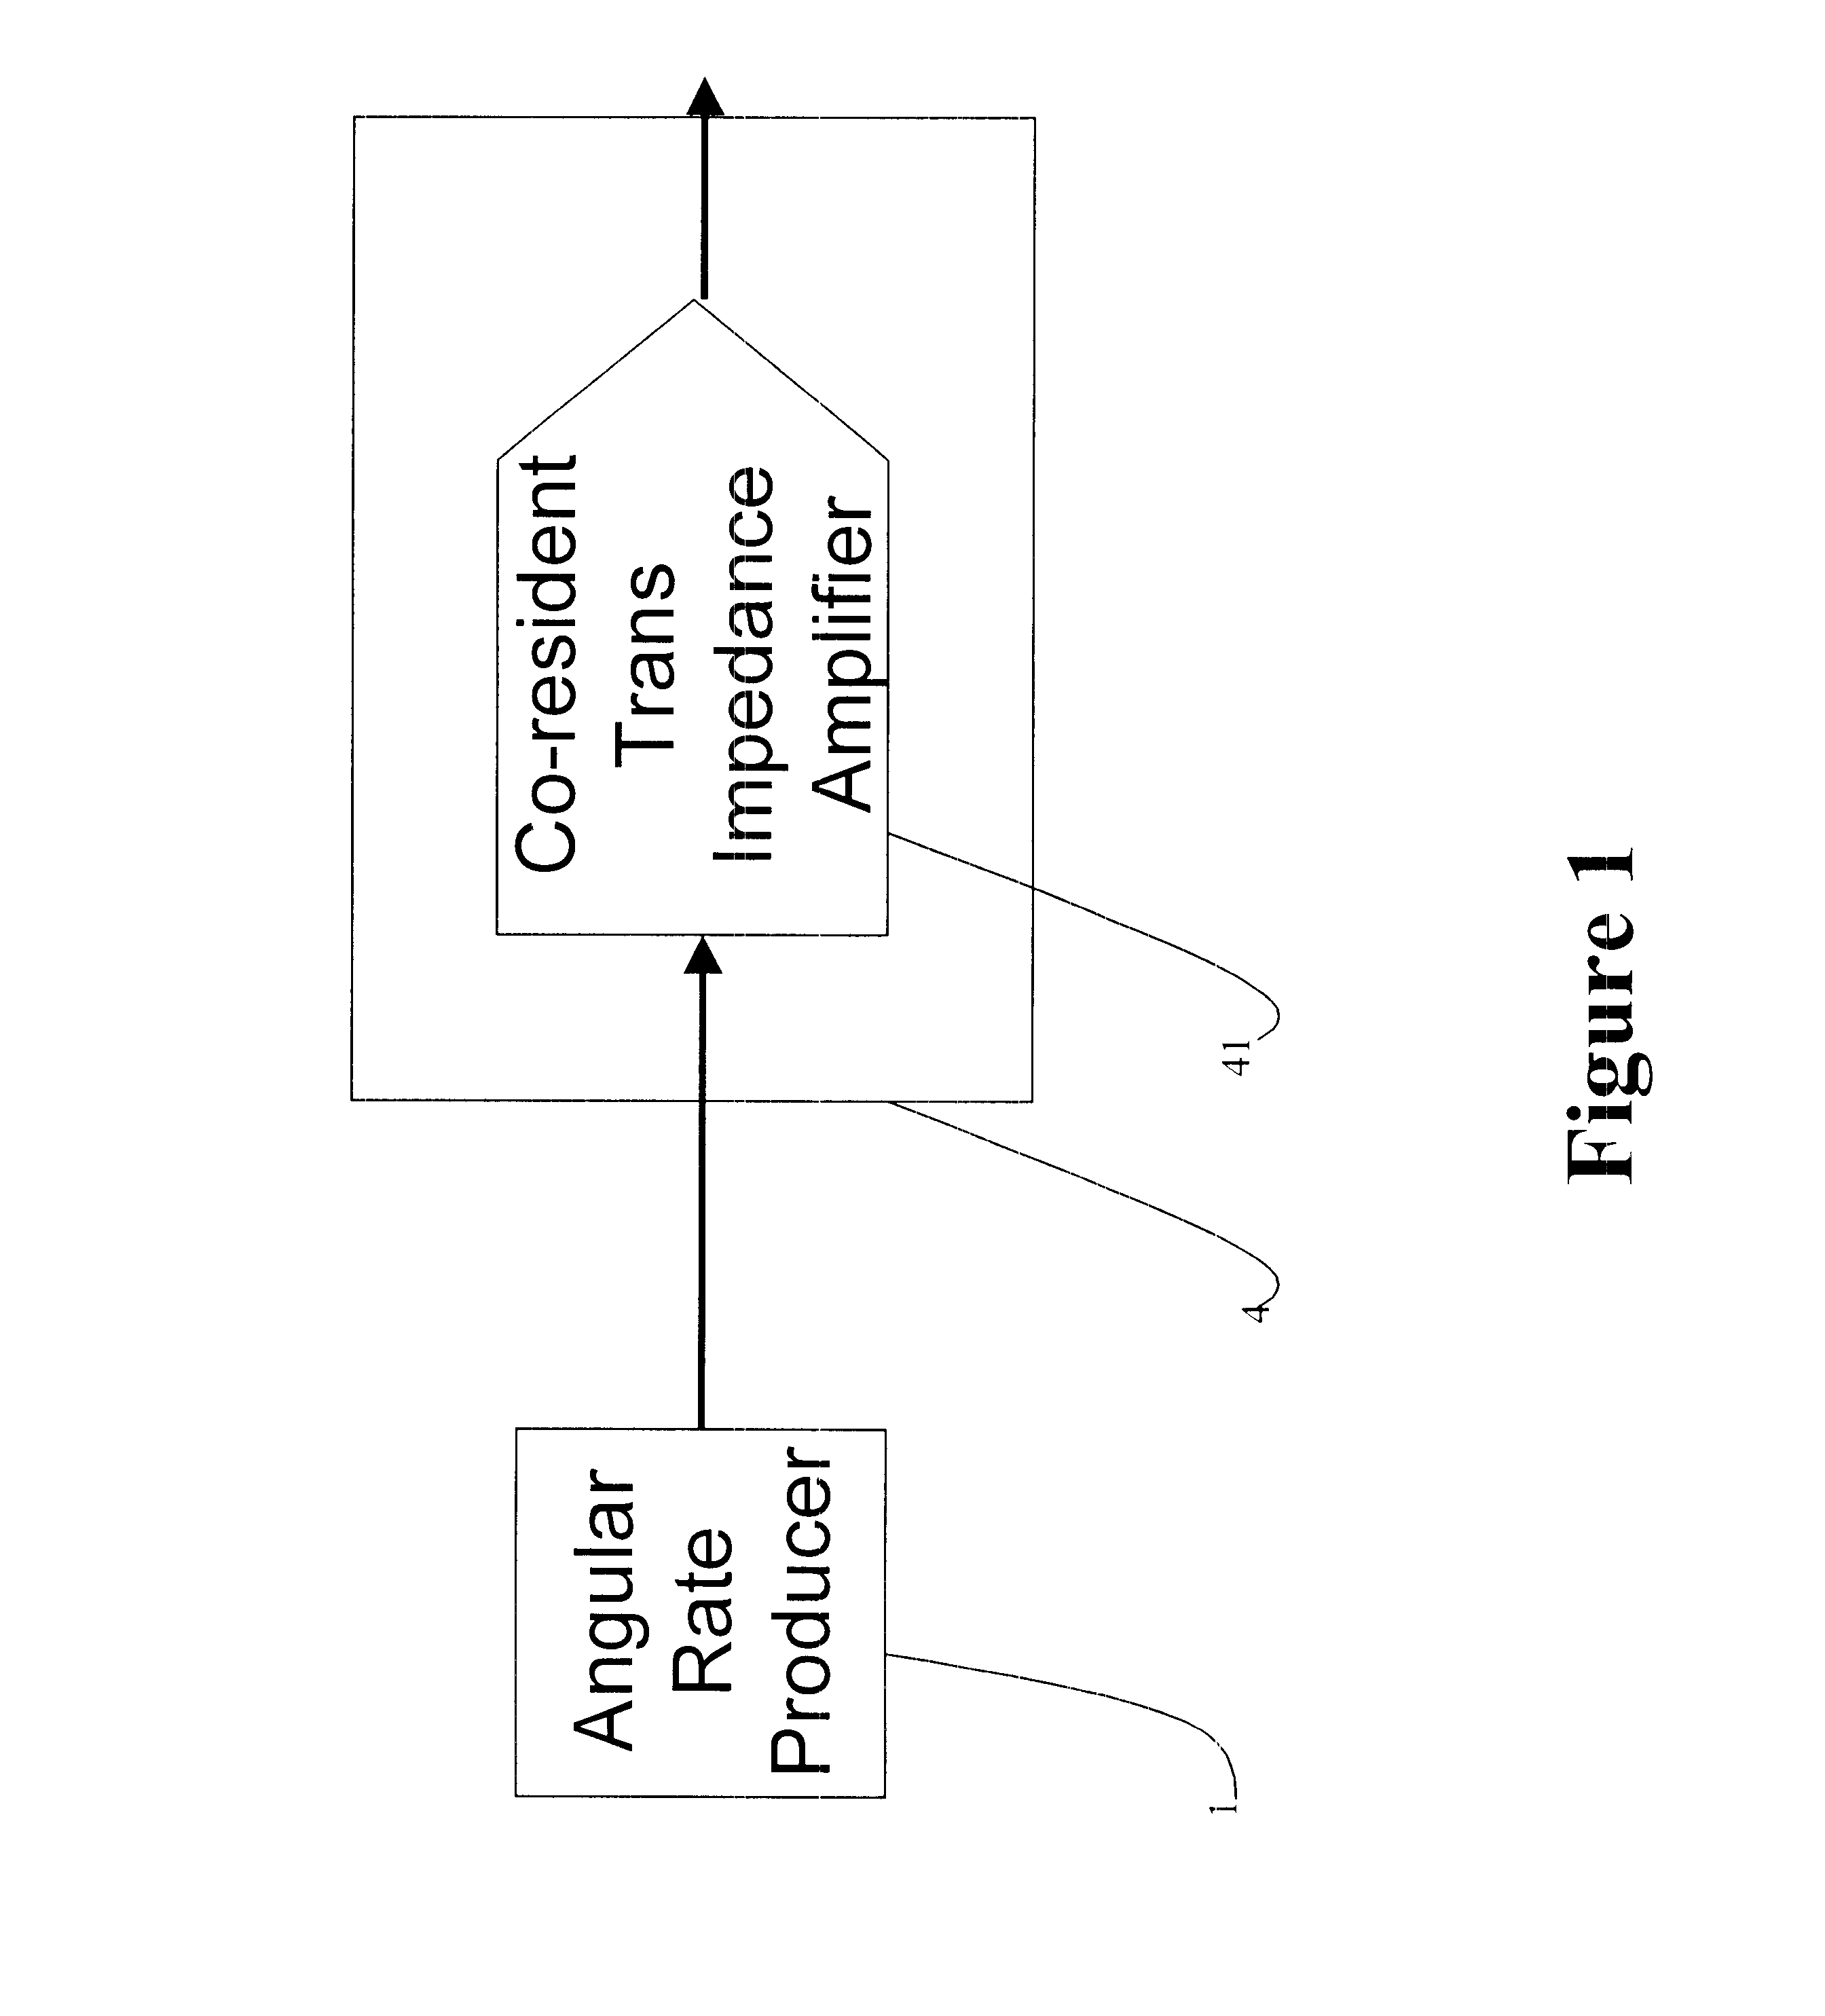 Angular rate amplifier with noise shield technology